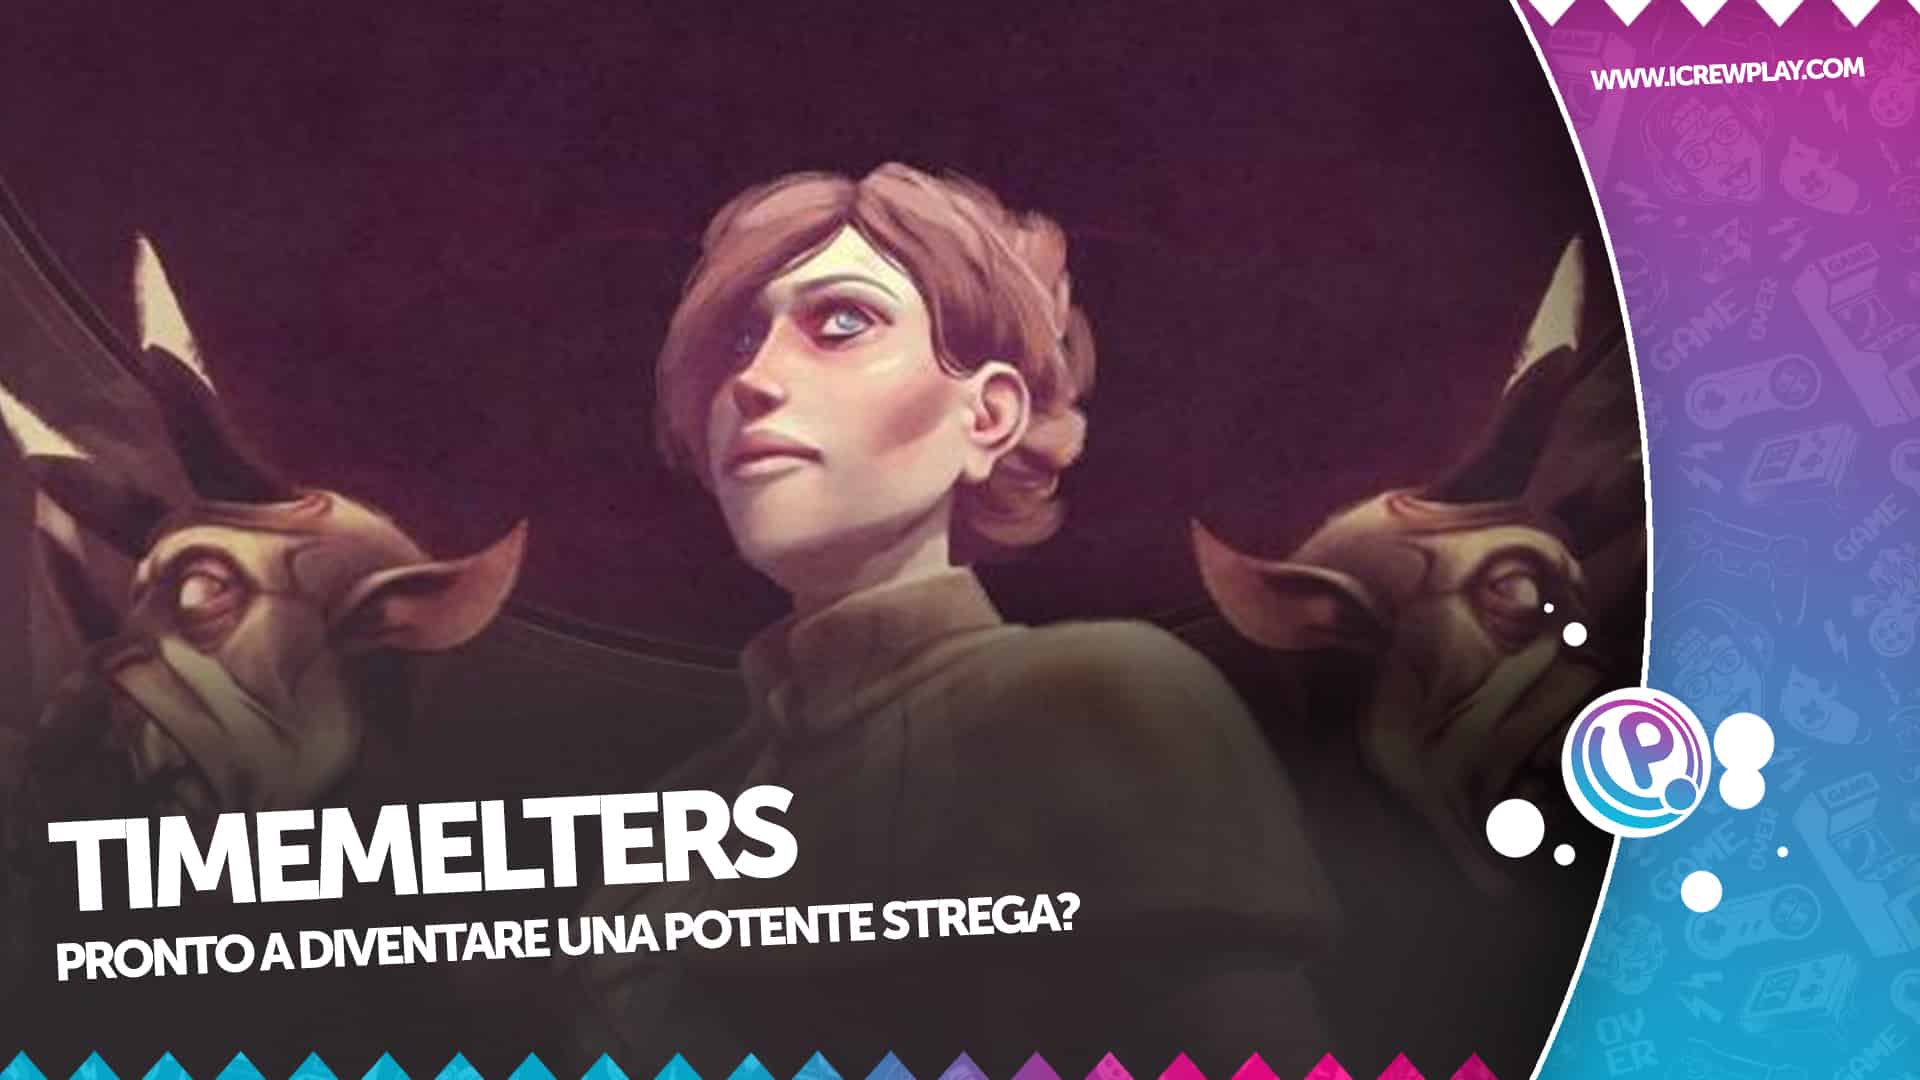 TimeMelters